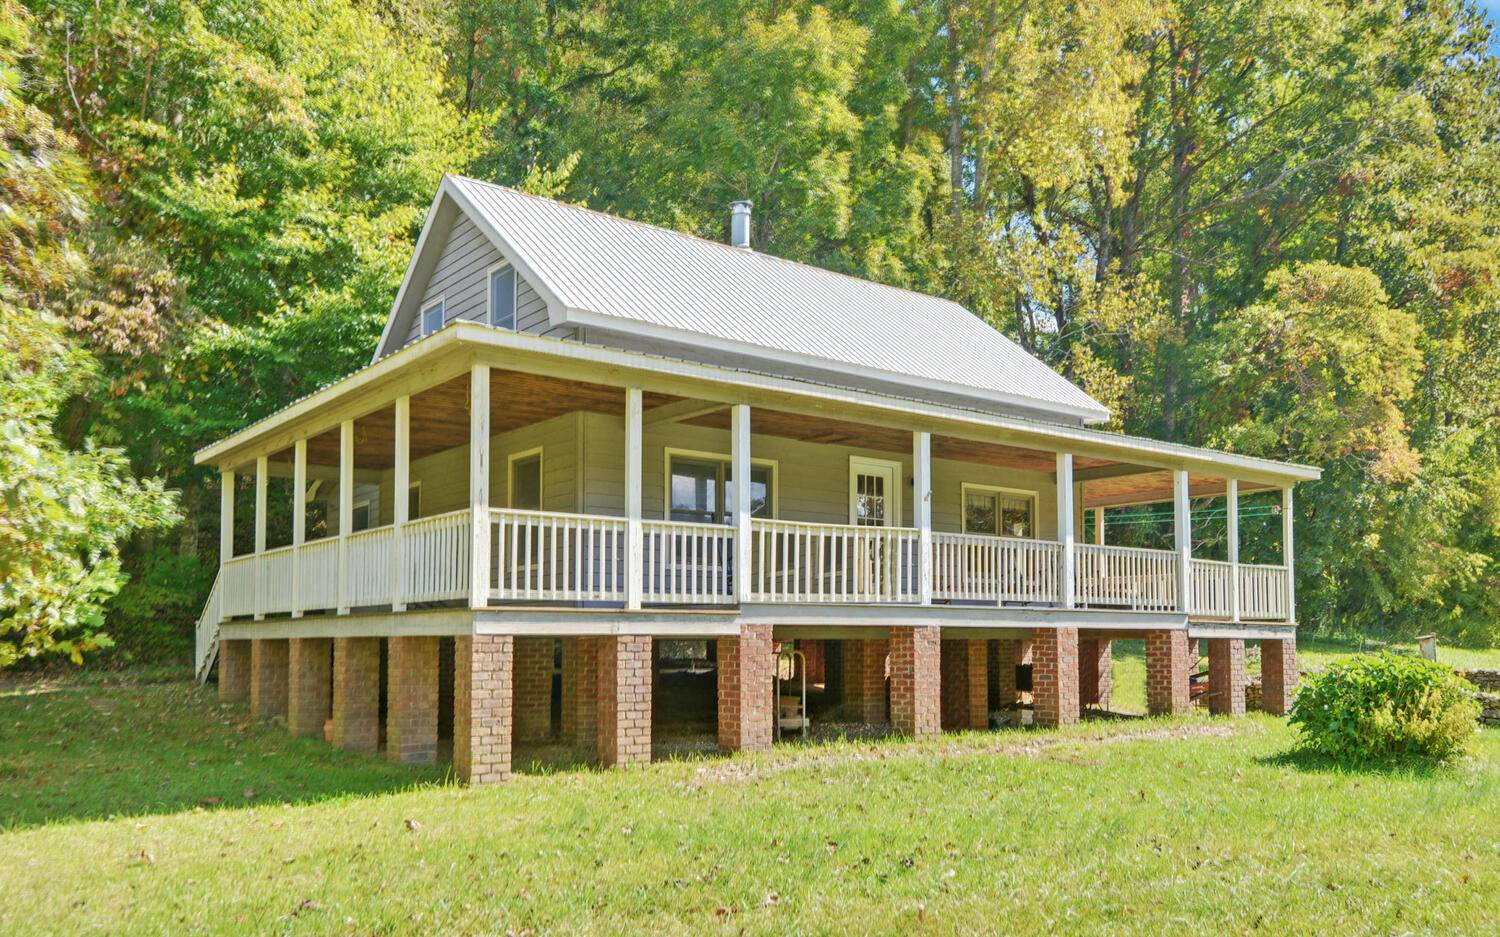 Riverfront Home! This charming home on 4.3 acres is surrounded by a lovely meadow that leads to the TOCCOA RIVER, frontage that curves around on 2 sides of the property. This wide river is easy to paddle on and is much wider than any other water source in the area. The home was custom built by the owner with all the fine touches of handmade cabinetry, lovely wood walls and furniture and floors. This is truly a delightful homey space that is tucked away yet close to the small community of Suches and the neighboring mountain communities. Dahlonega, Blue Ridge, and Blairsville are close. Hiking and camping at Vogel State Park and Woody Gap at the Appalachian Trail are just minutes away. This is an estate sale of a family home that has been well loved and thoughtfully built. There is a separate septic system for the laundry equipment. Built high up to prevent flooding but this property has never flooded since it was built in 1994. See the pictures of the recent hay bales cut from the meadow. The owner was a master carpenter, and every bit of this home shows his beautiful, careful work. You won’t regret looking at this home!